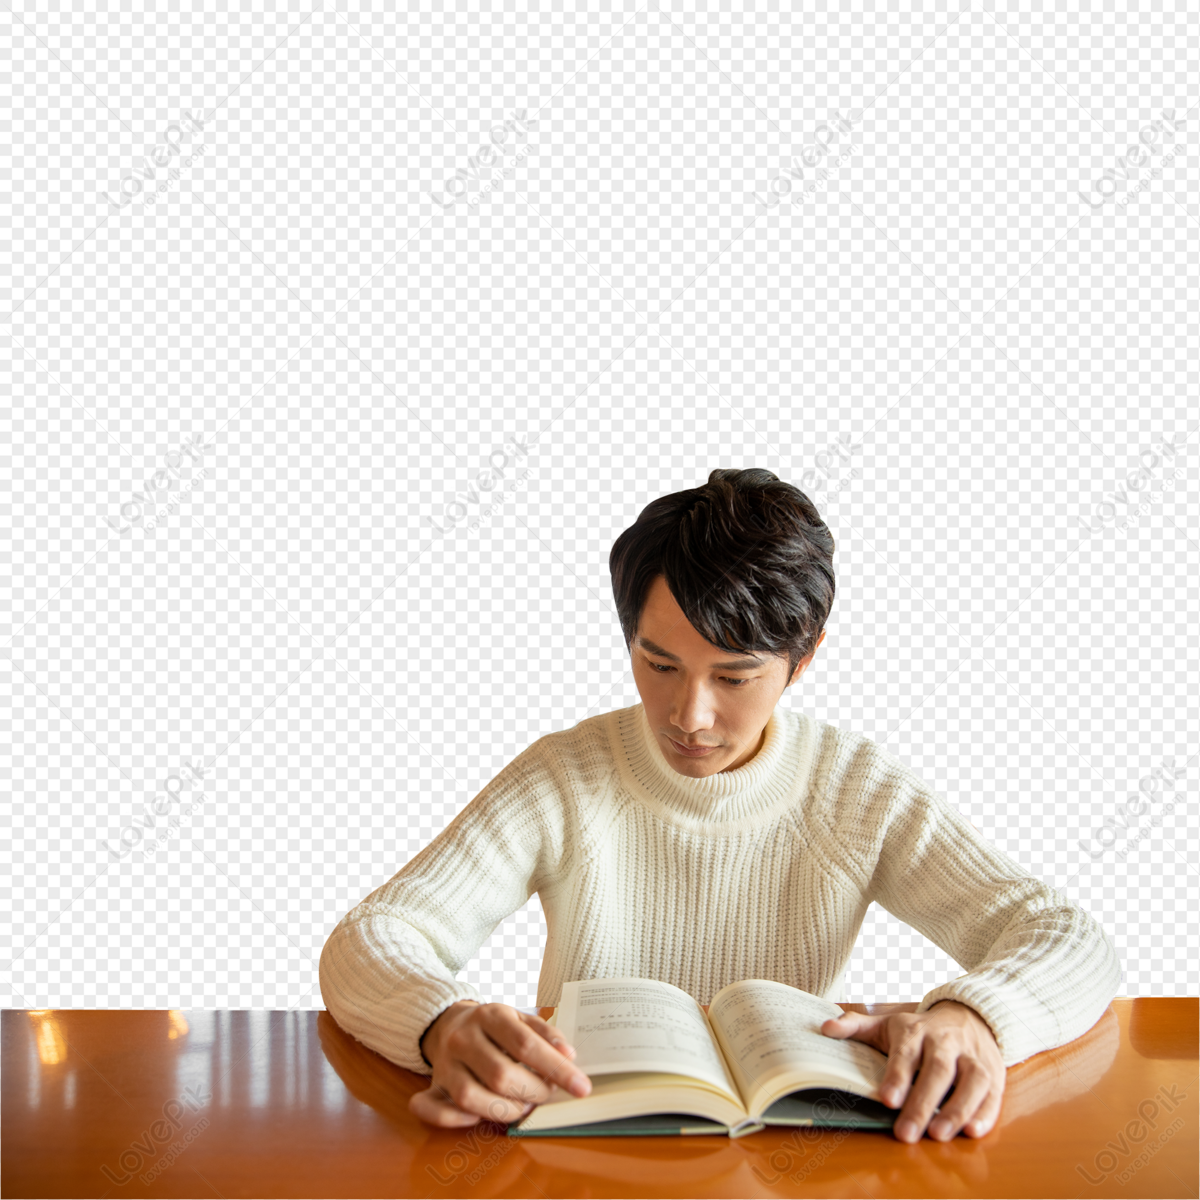 Young male sitting in library reading books, young, reading materials, book png white transparent